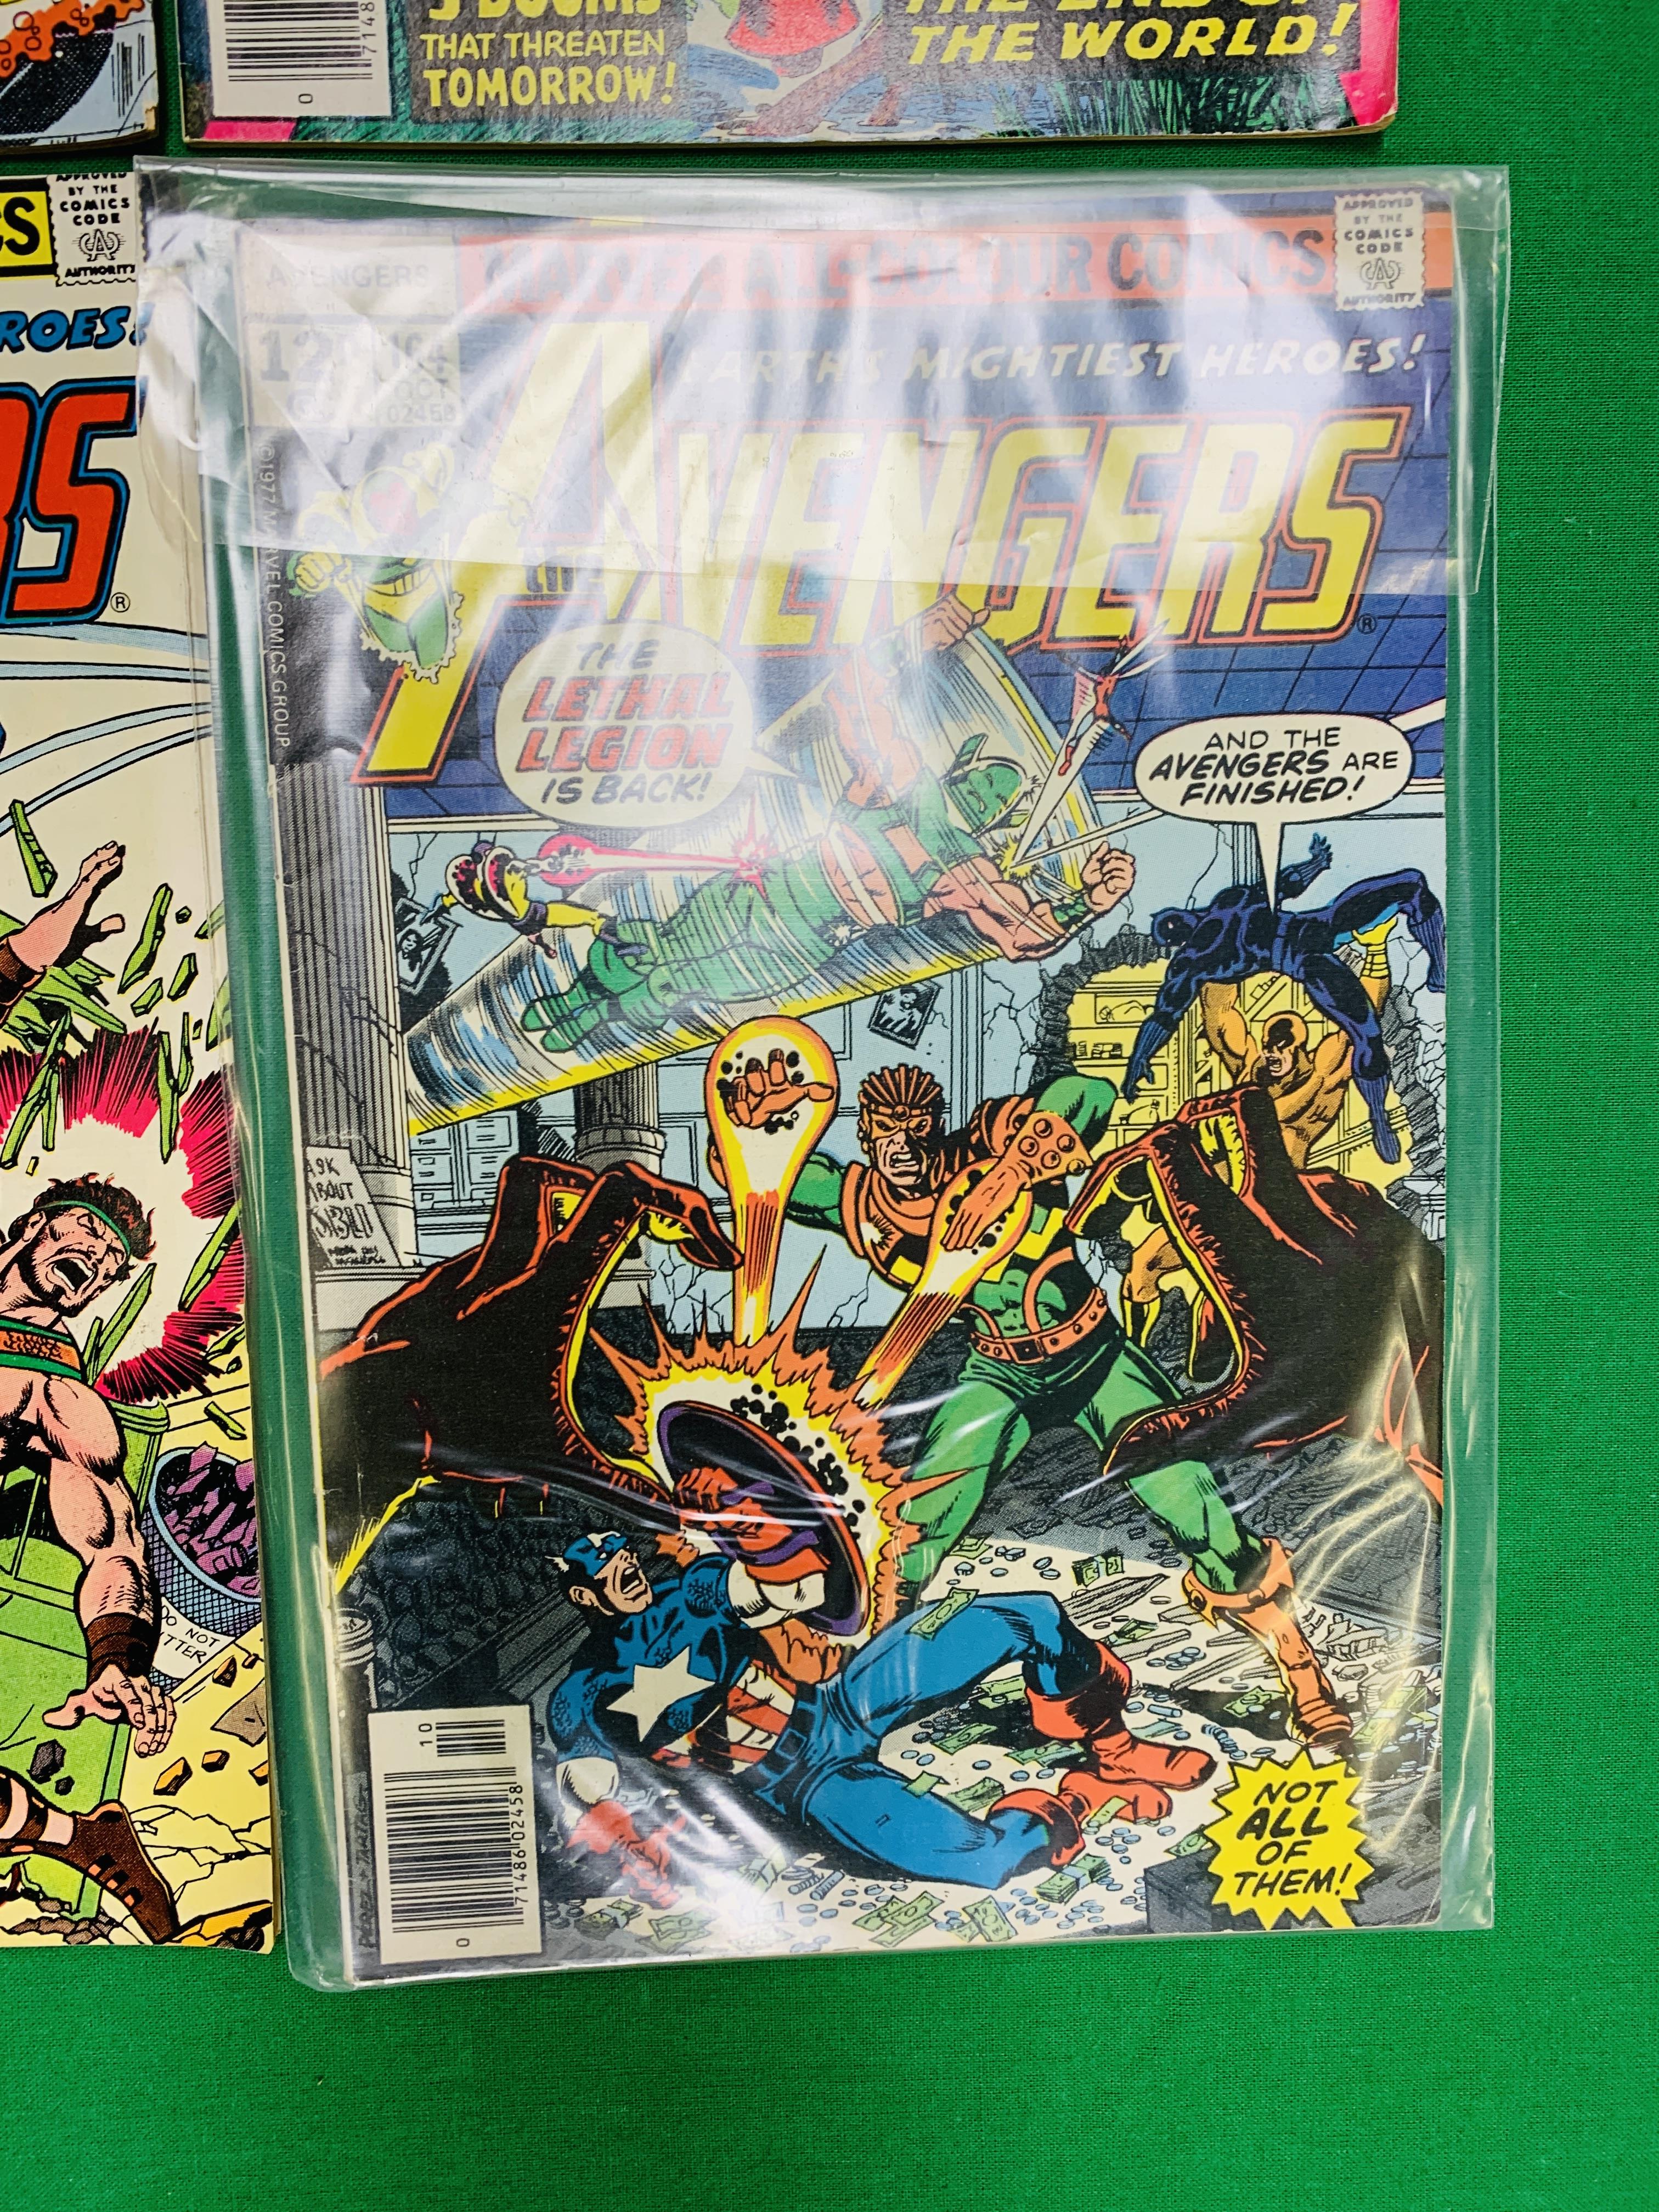 MARVEL COMICS THE AVENGERS NO. 101 - 299, MISSING ISSUES 103 AND 110. - Image 49 of 130